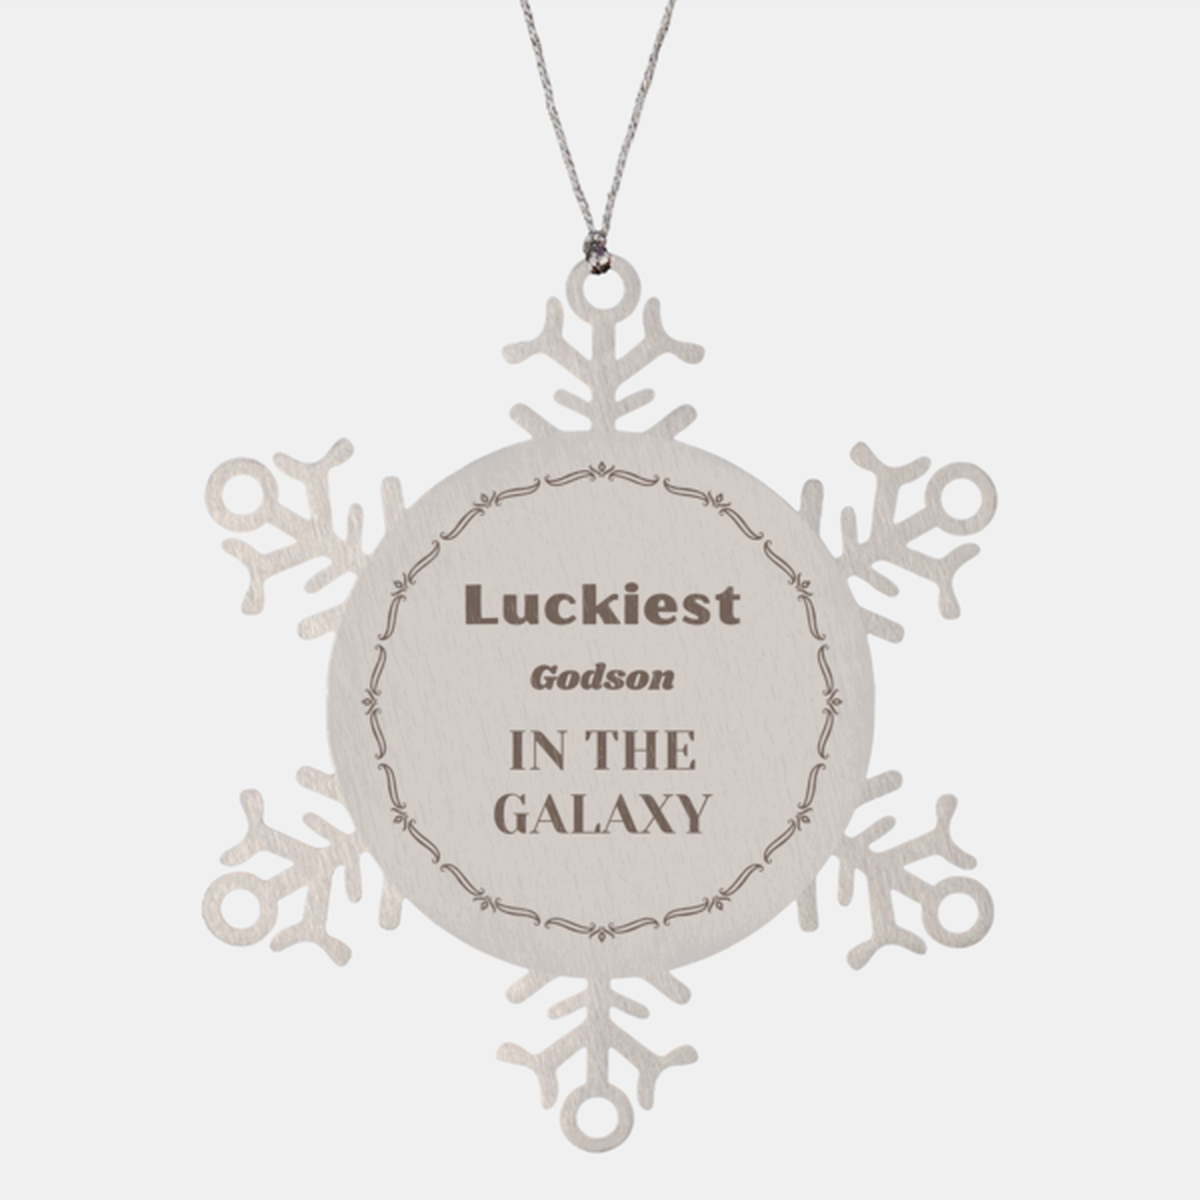 Luckiest Godson in the Galaxy, To My Godson Ornament Gifts, Christmas Godson Snowflake Ornament Gifts, X-mas Decorations Unique Gifts For Godson Men Women